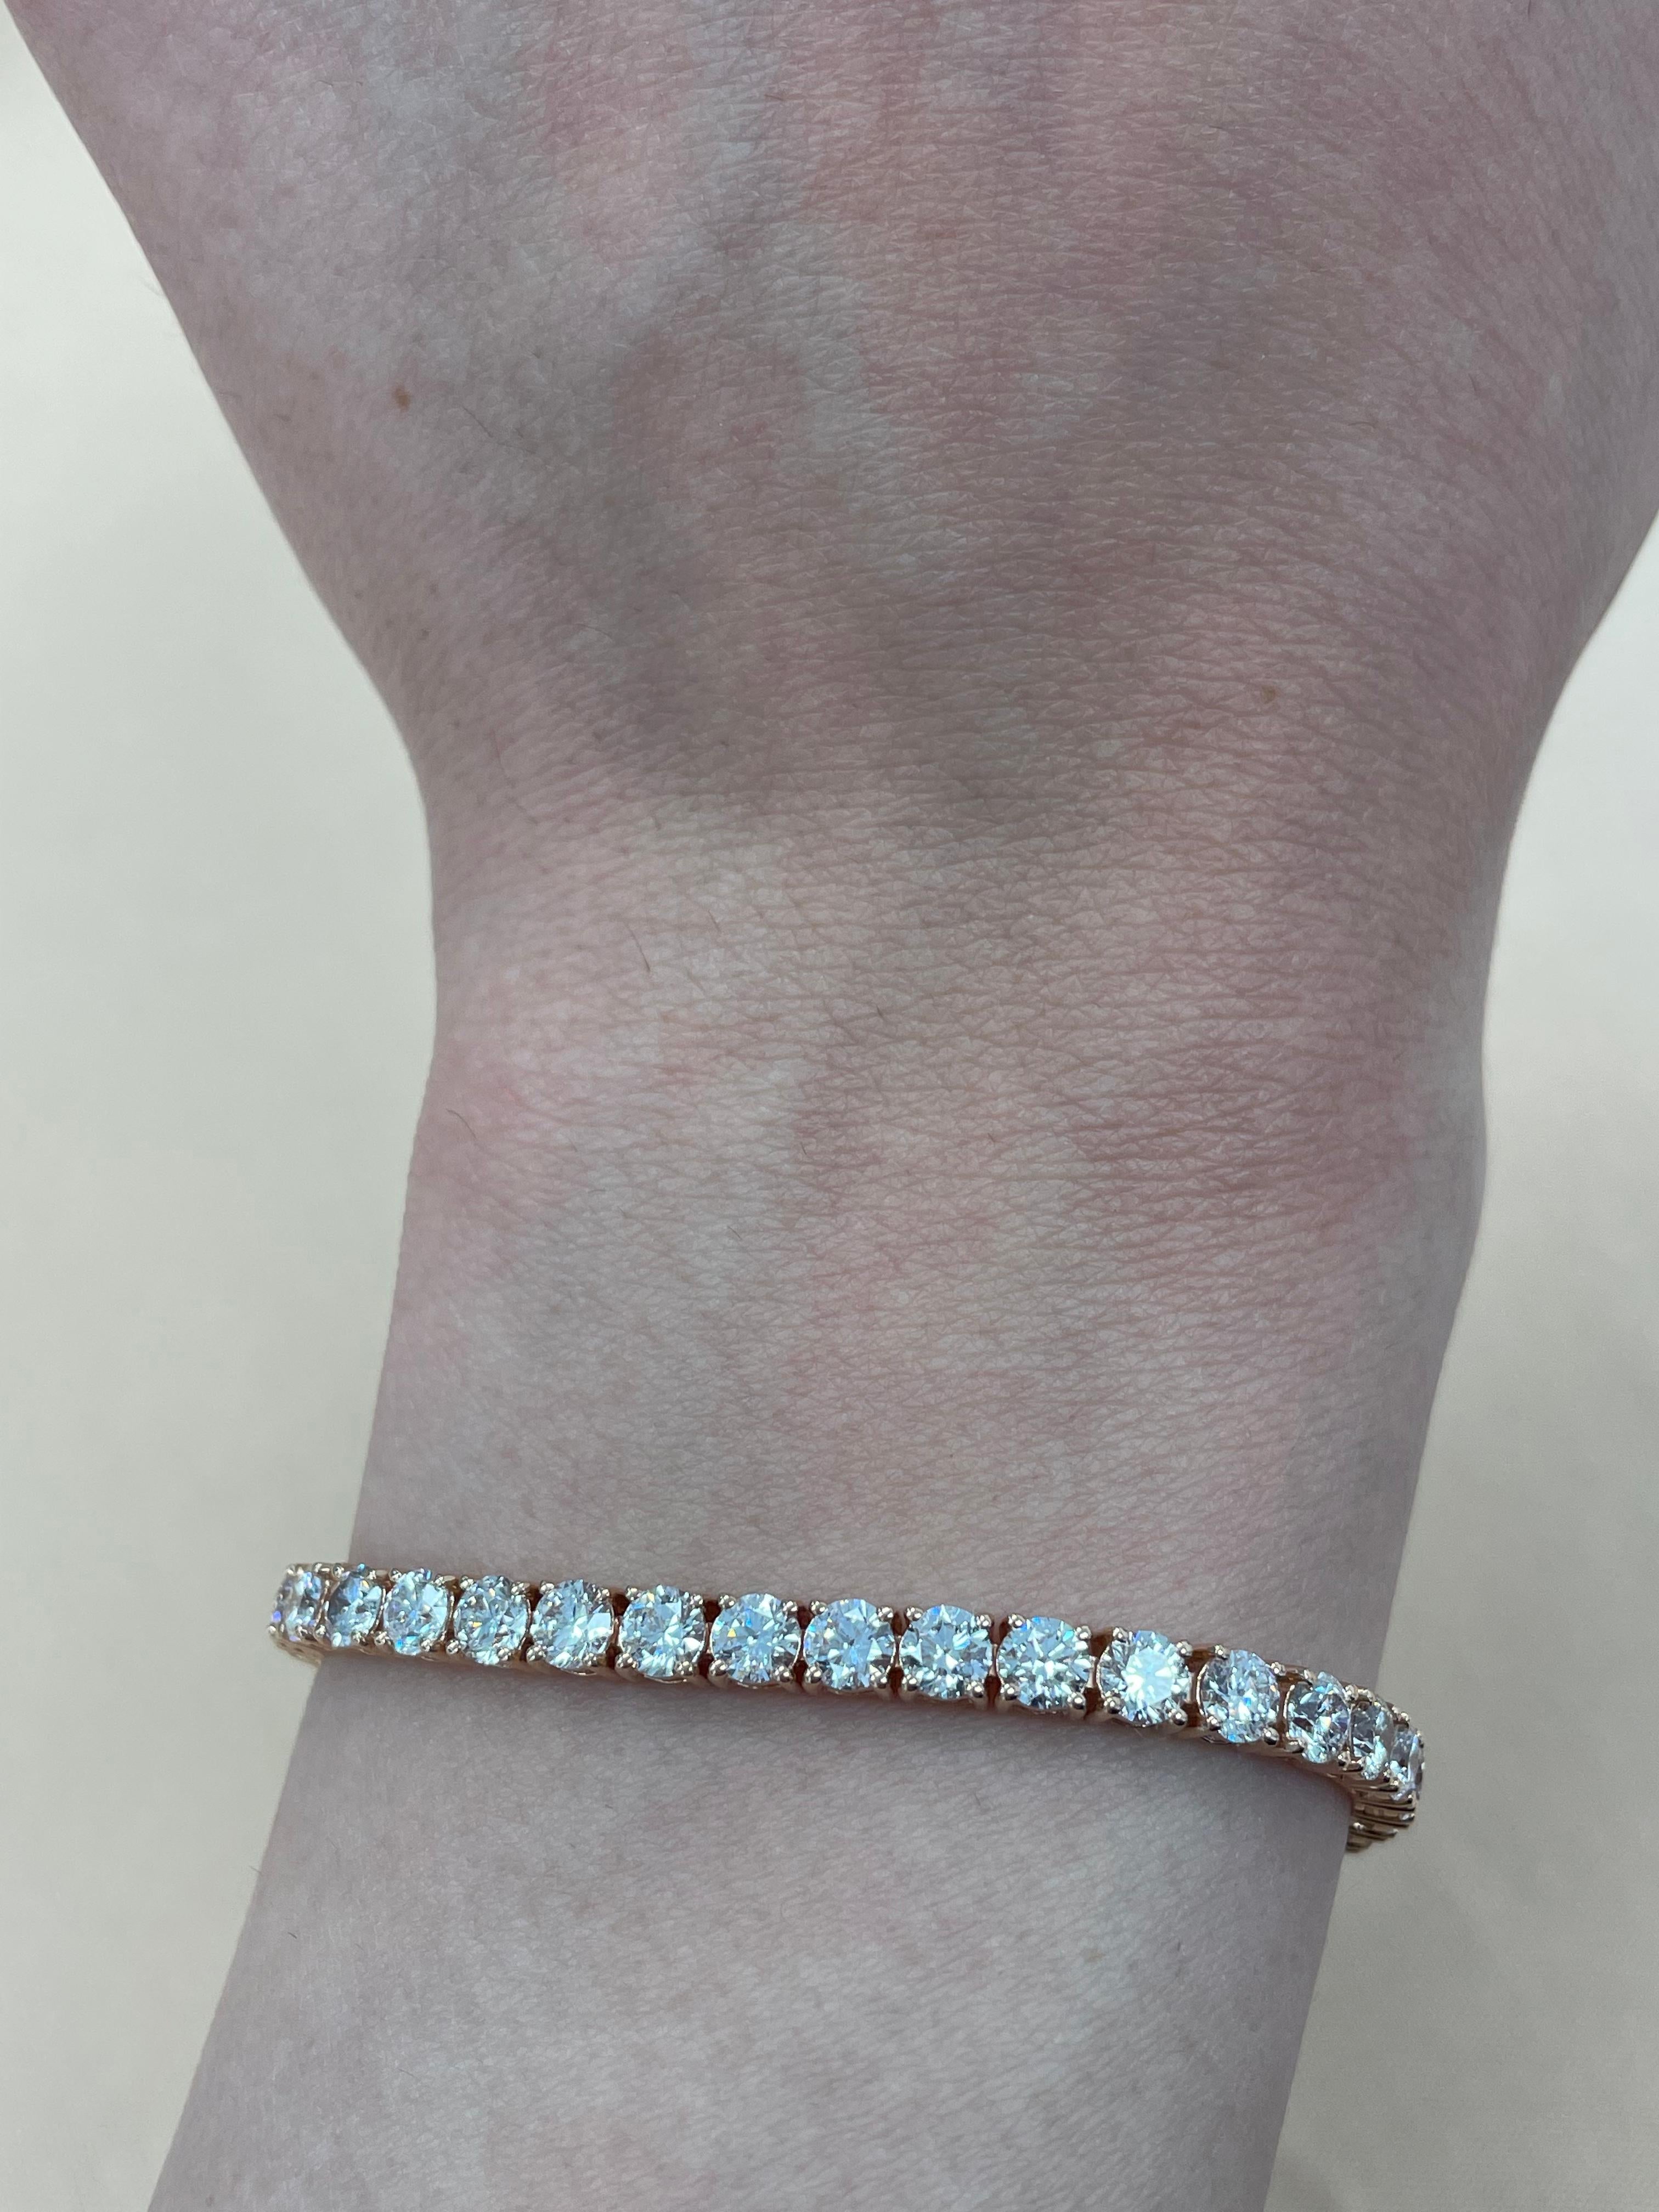 Exquisite and timeless diamonds tennis bracelet, by Alexander Beverly Hills.
45 round brilliant diamonds, 8.80 carats total. Approximately Very Light Pink color (looks like regular white diamonds in mounting) and VS2/SI1 clarity. Four prong set in